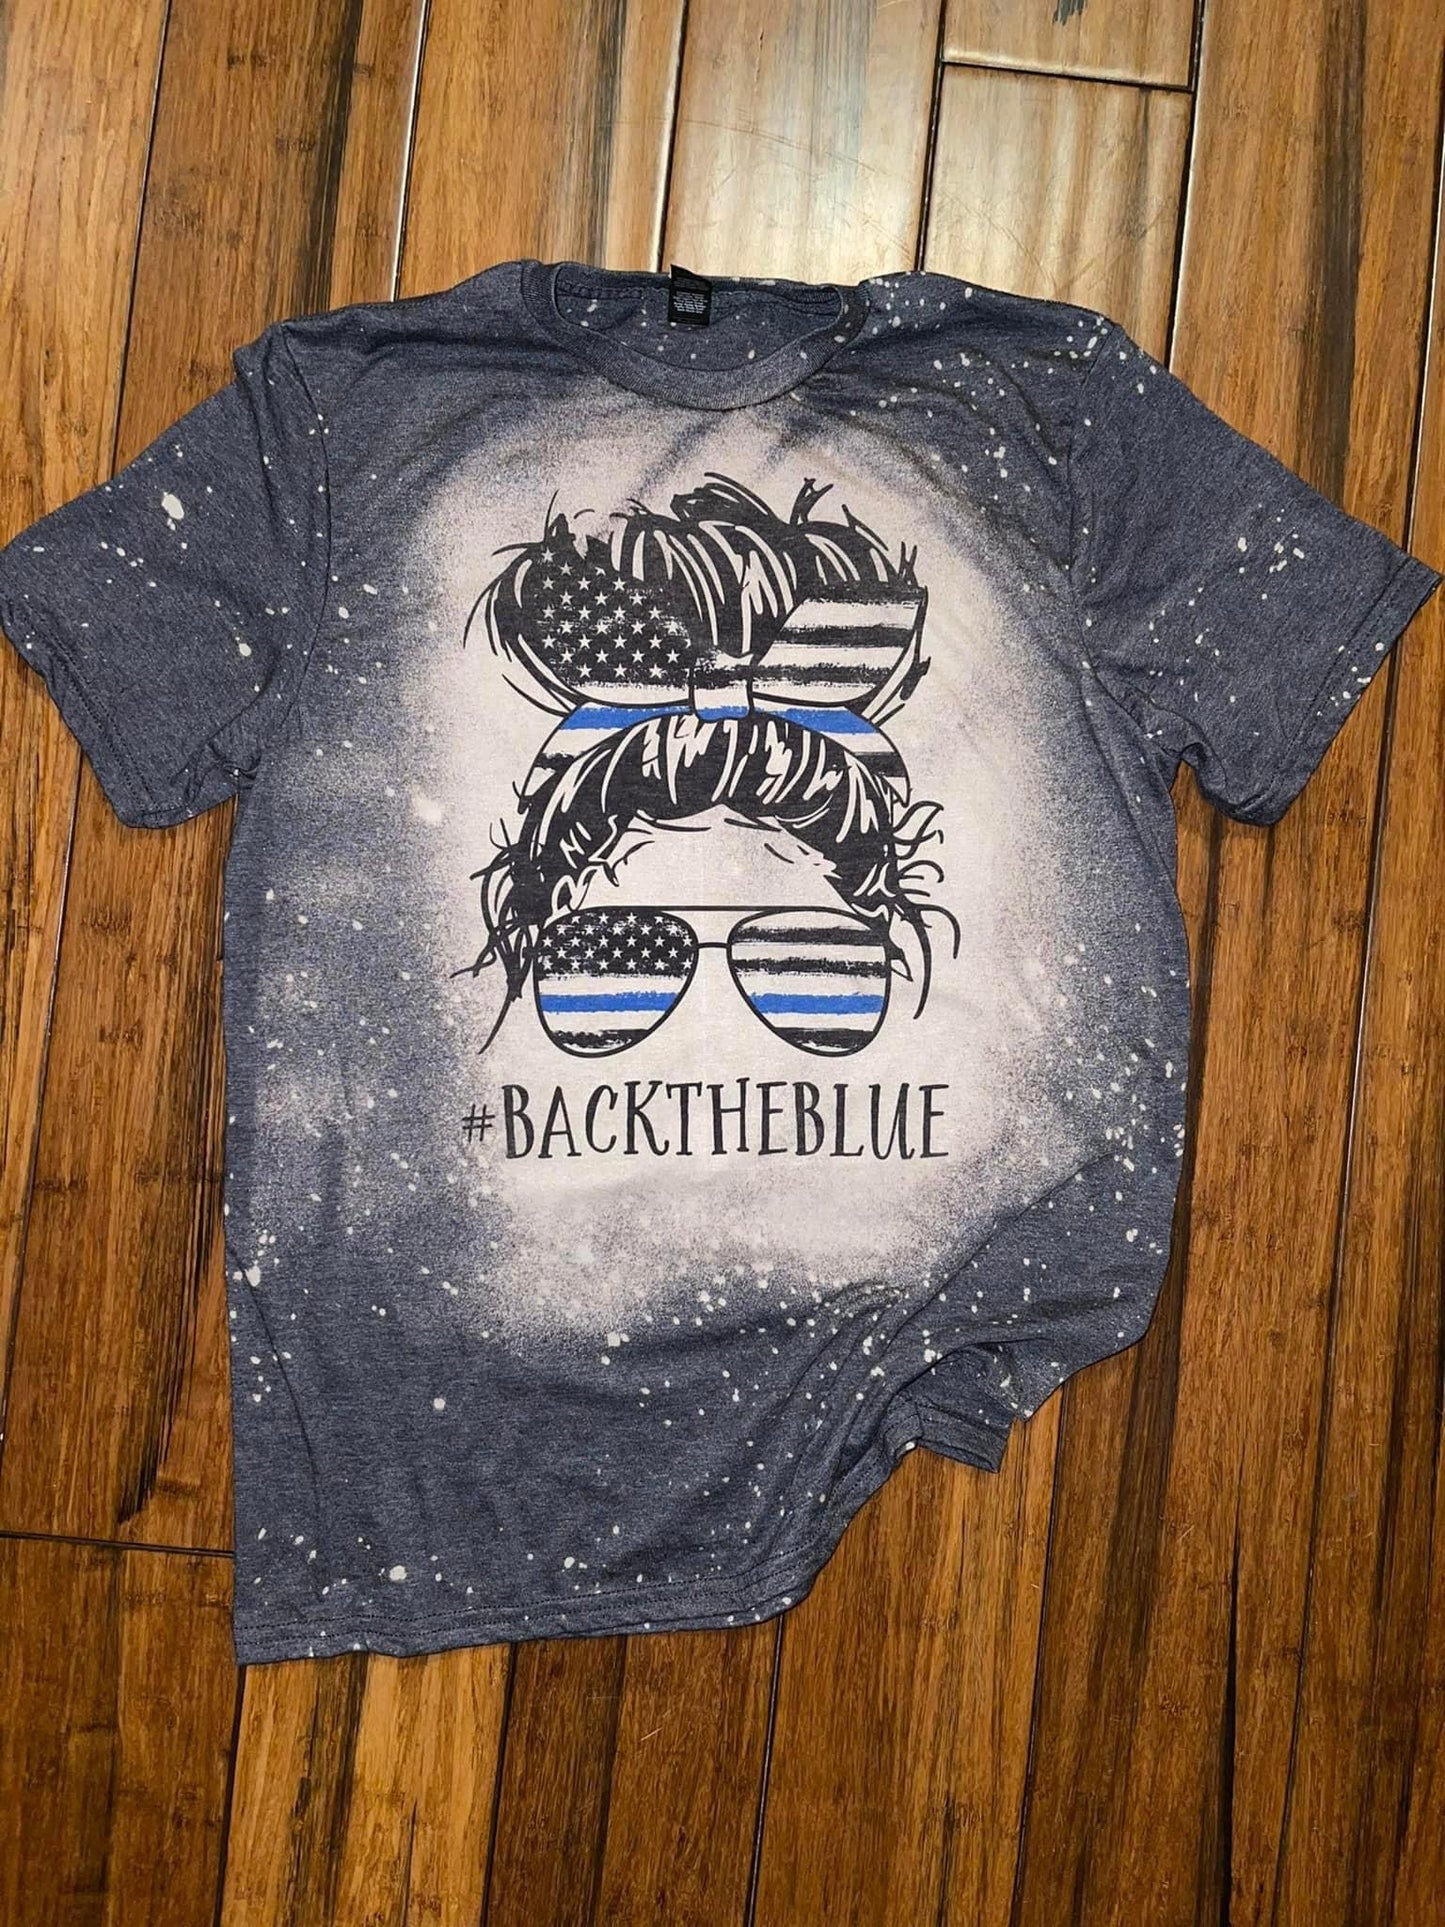 Back the blue bleached tee